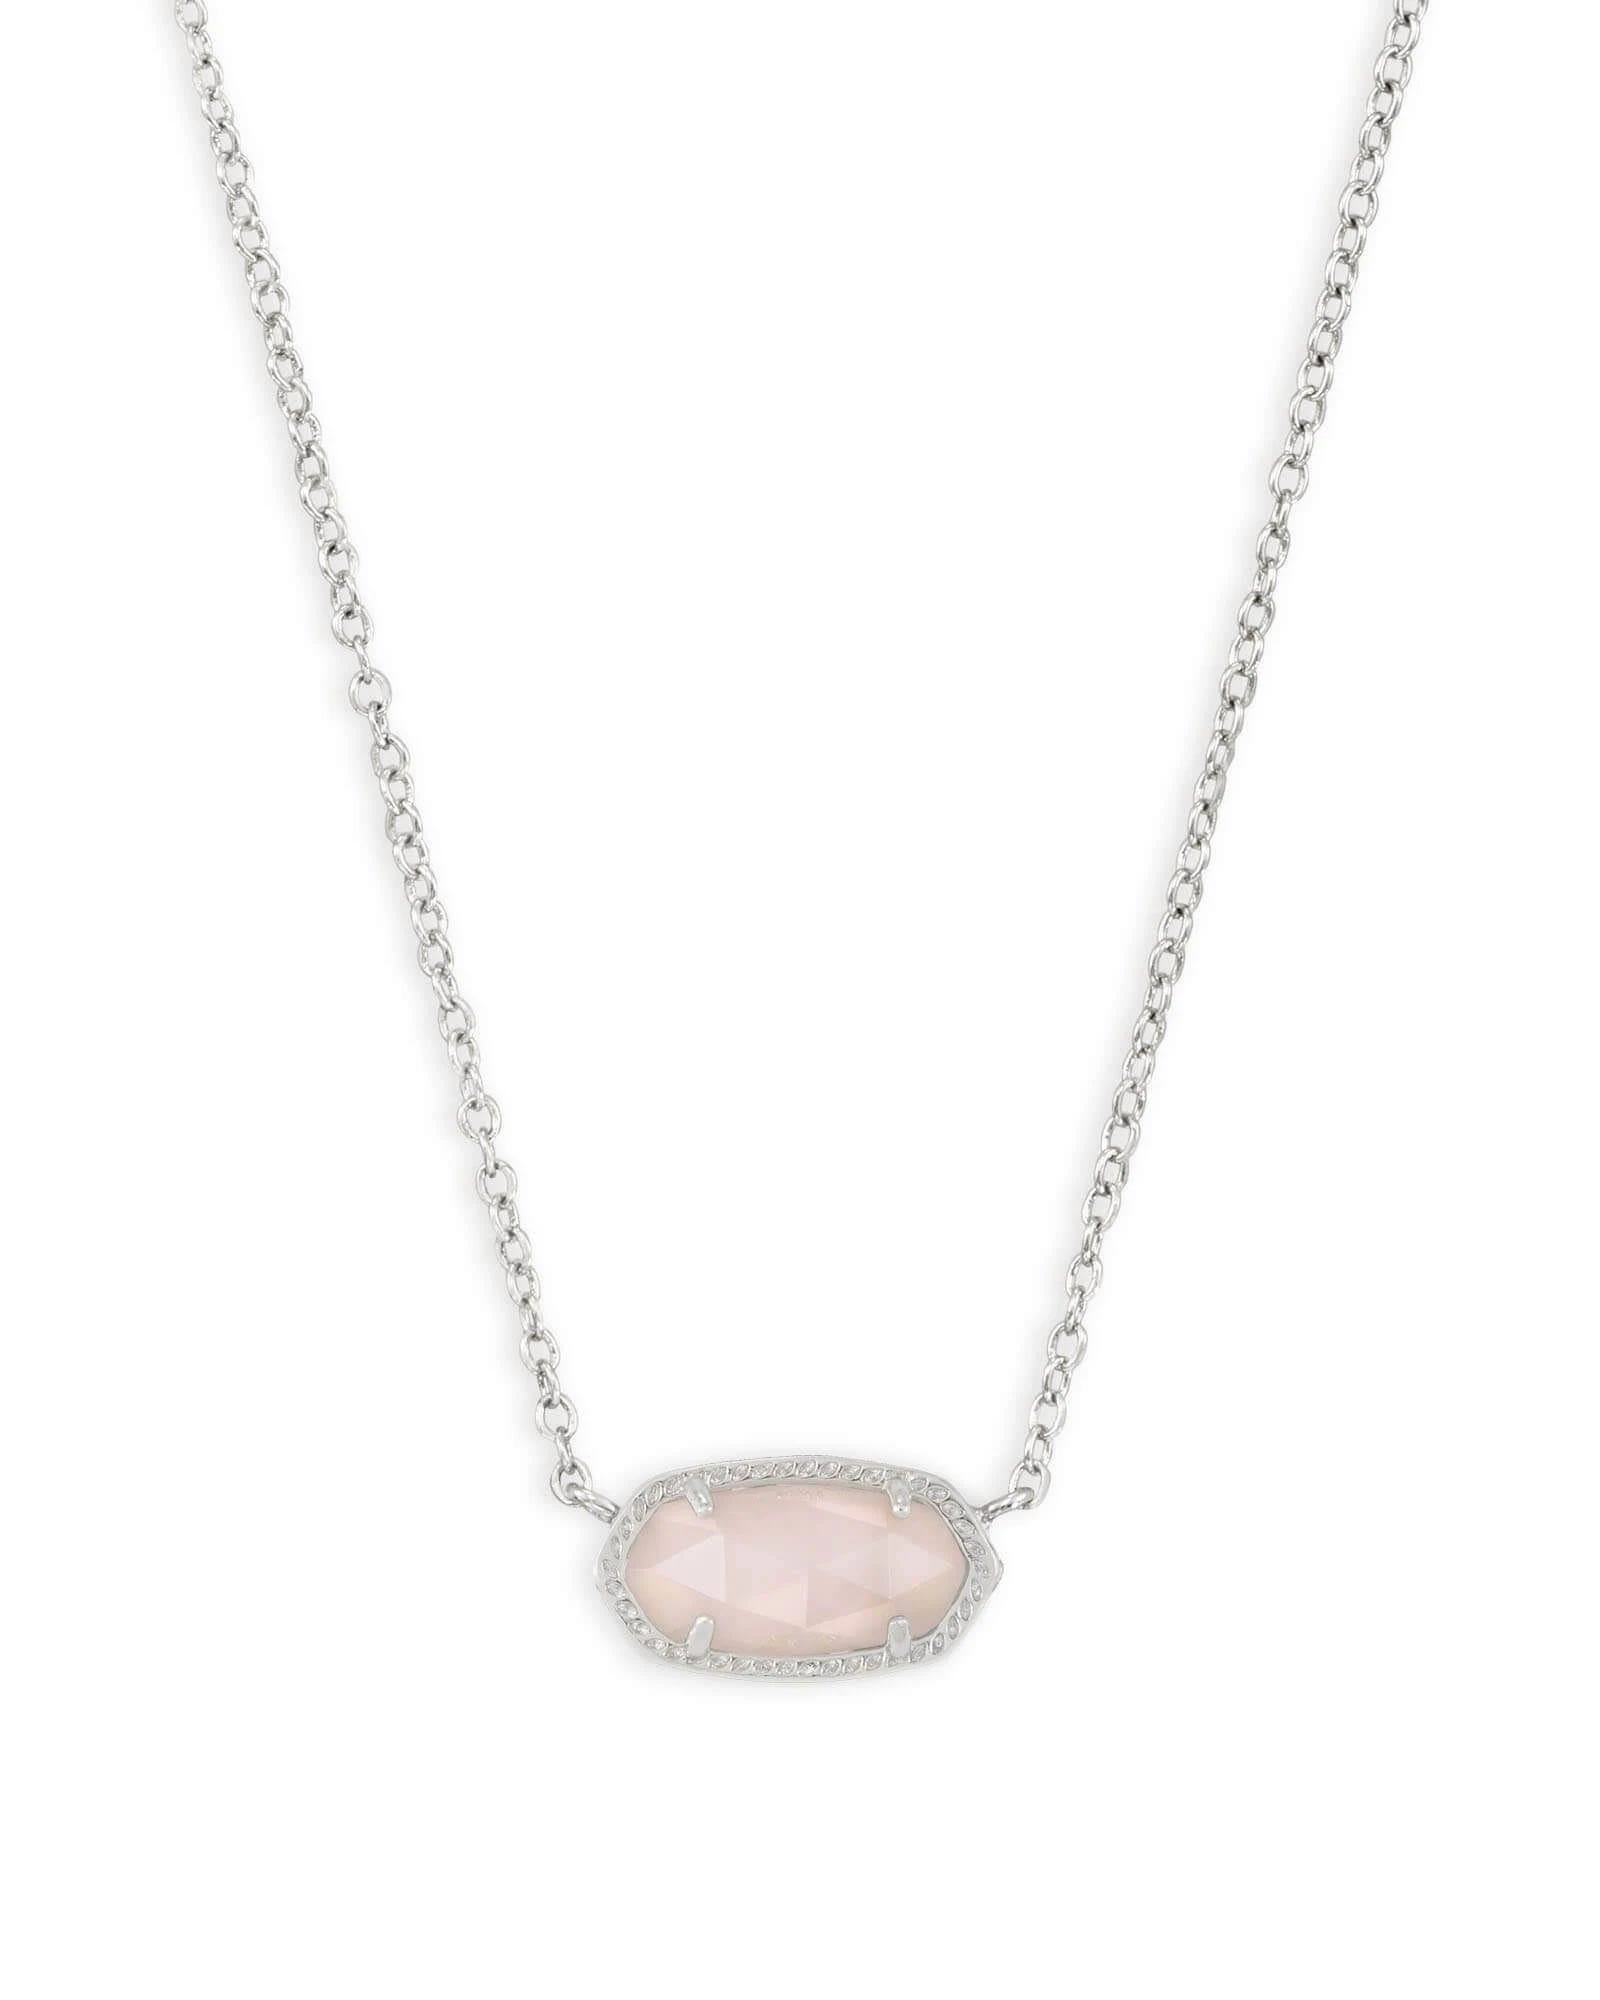 Chic White Mother-of-Pearl Gold Pendant Necklace | Image